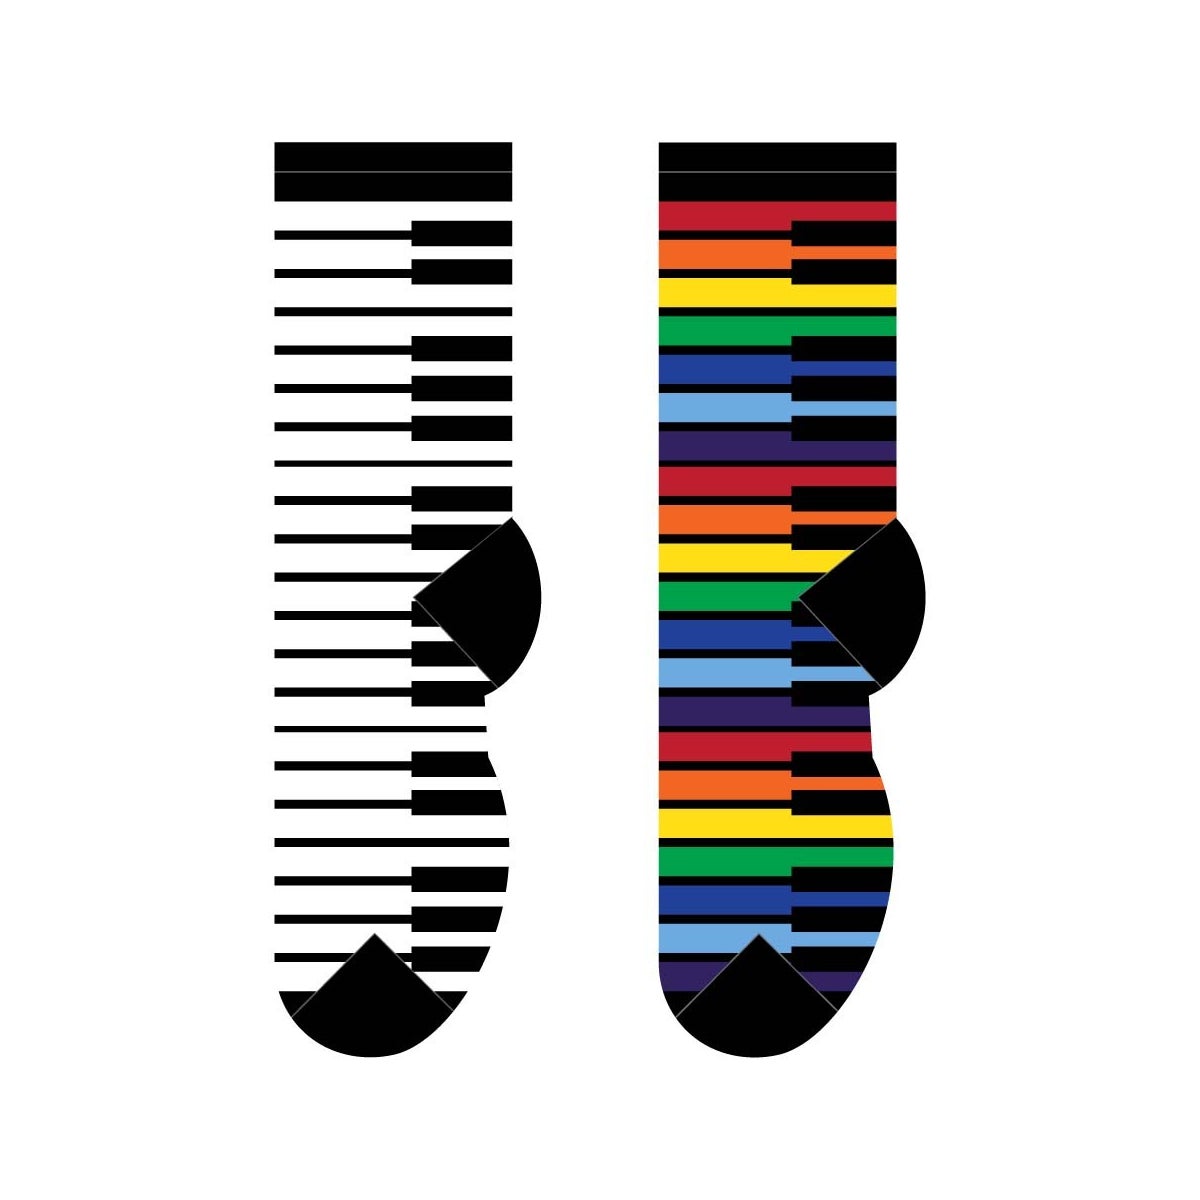 Piano Keys - 6 pairs each of 2 colours